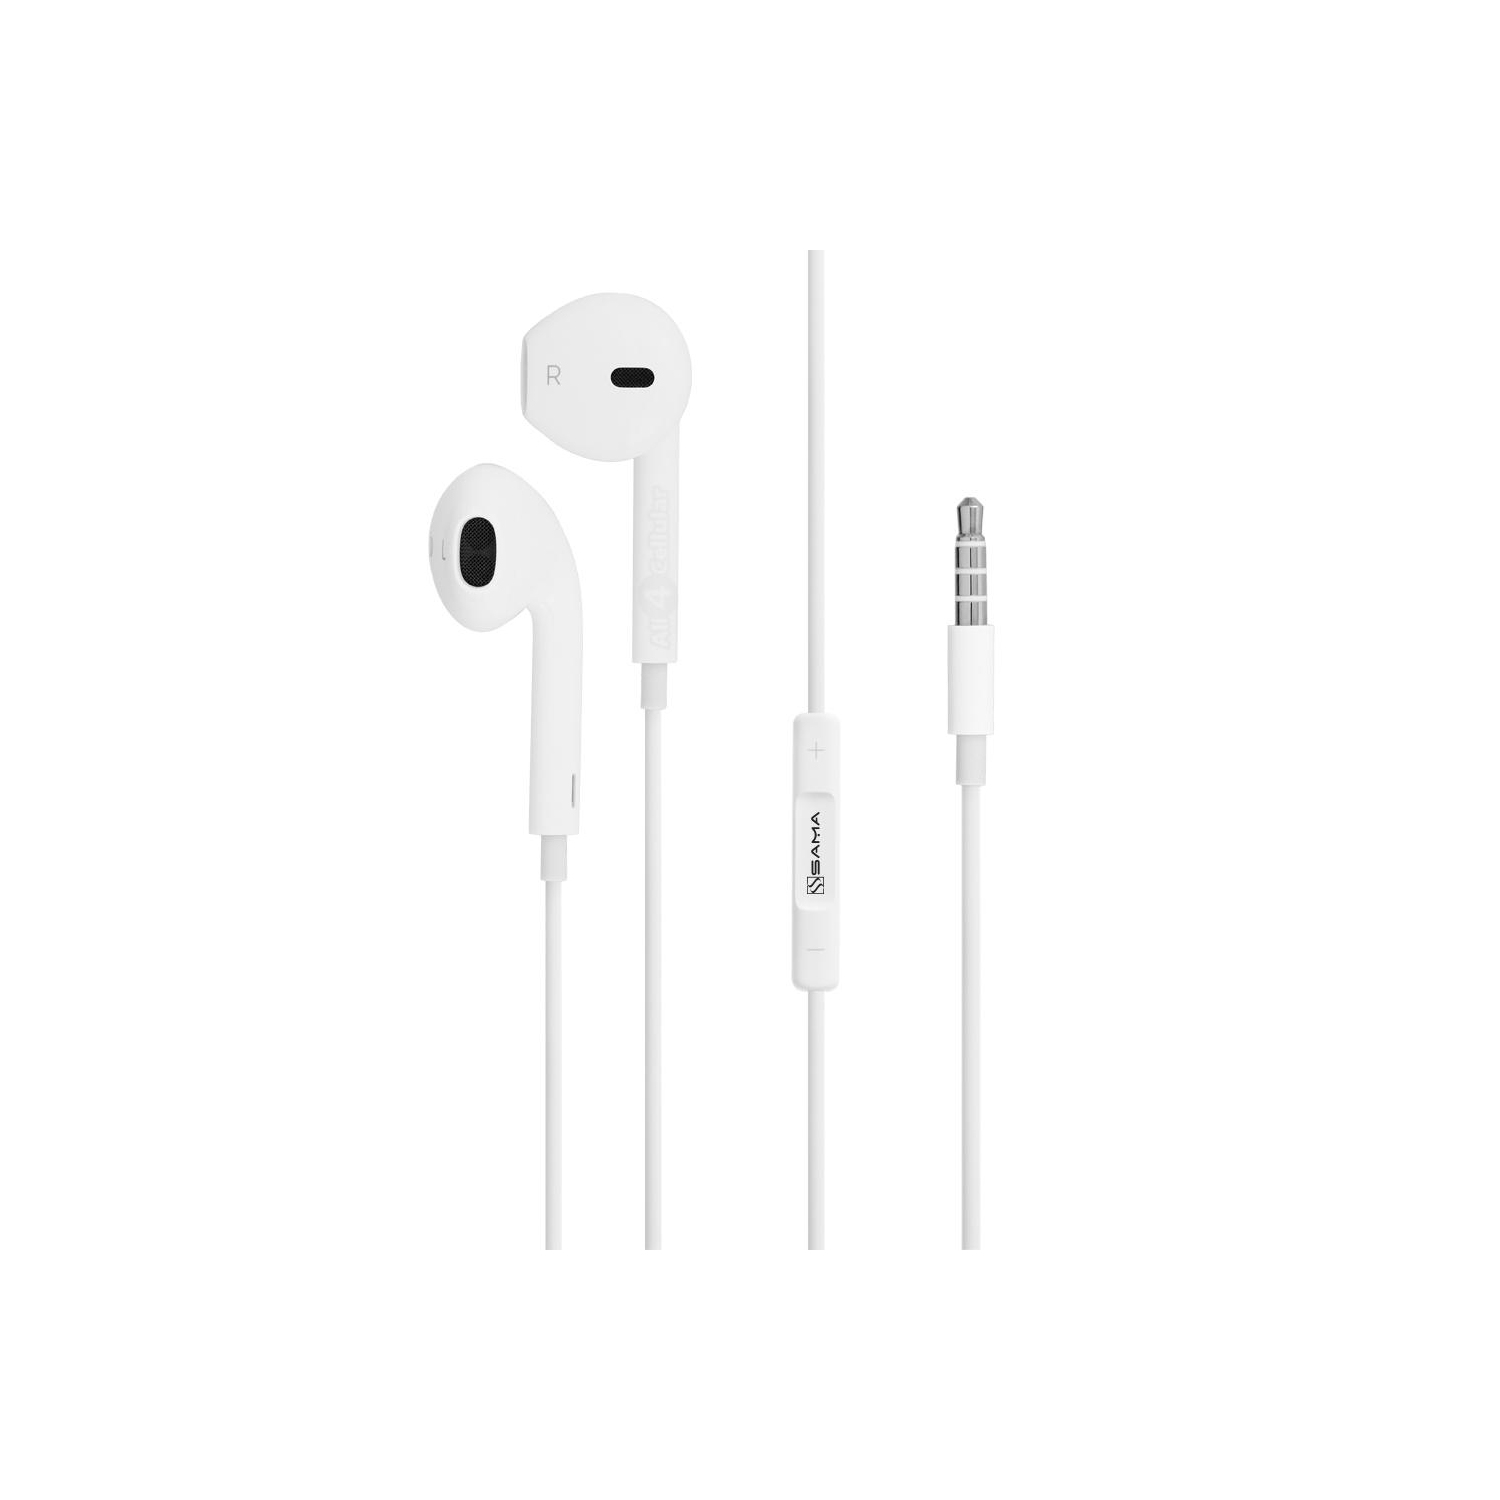 SAMA SA-312 Earphone With Mic 3.5mm plug Compatible with Apple iPhone 6s 6 5s 5 4s 4, and all other android Devices